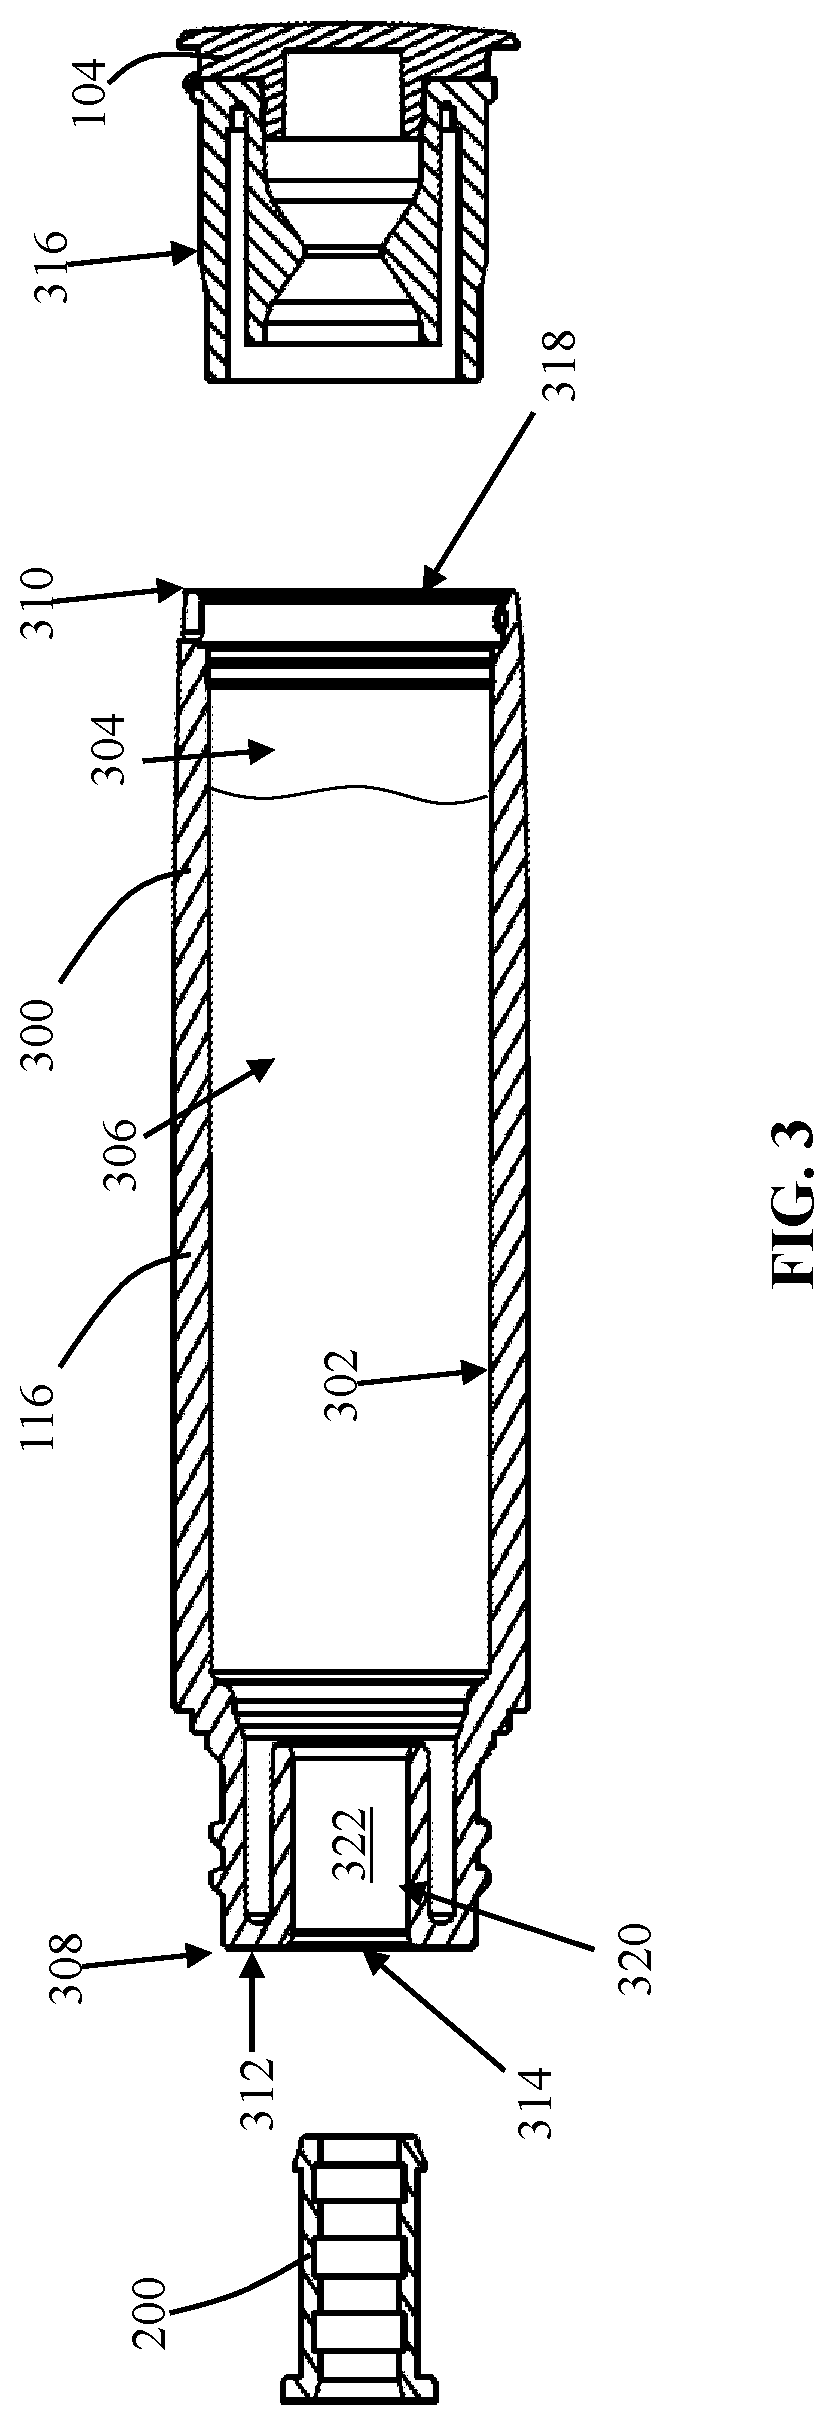 Single-handed extendable cosmetic applicator